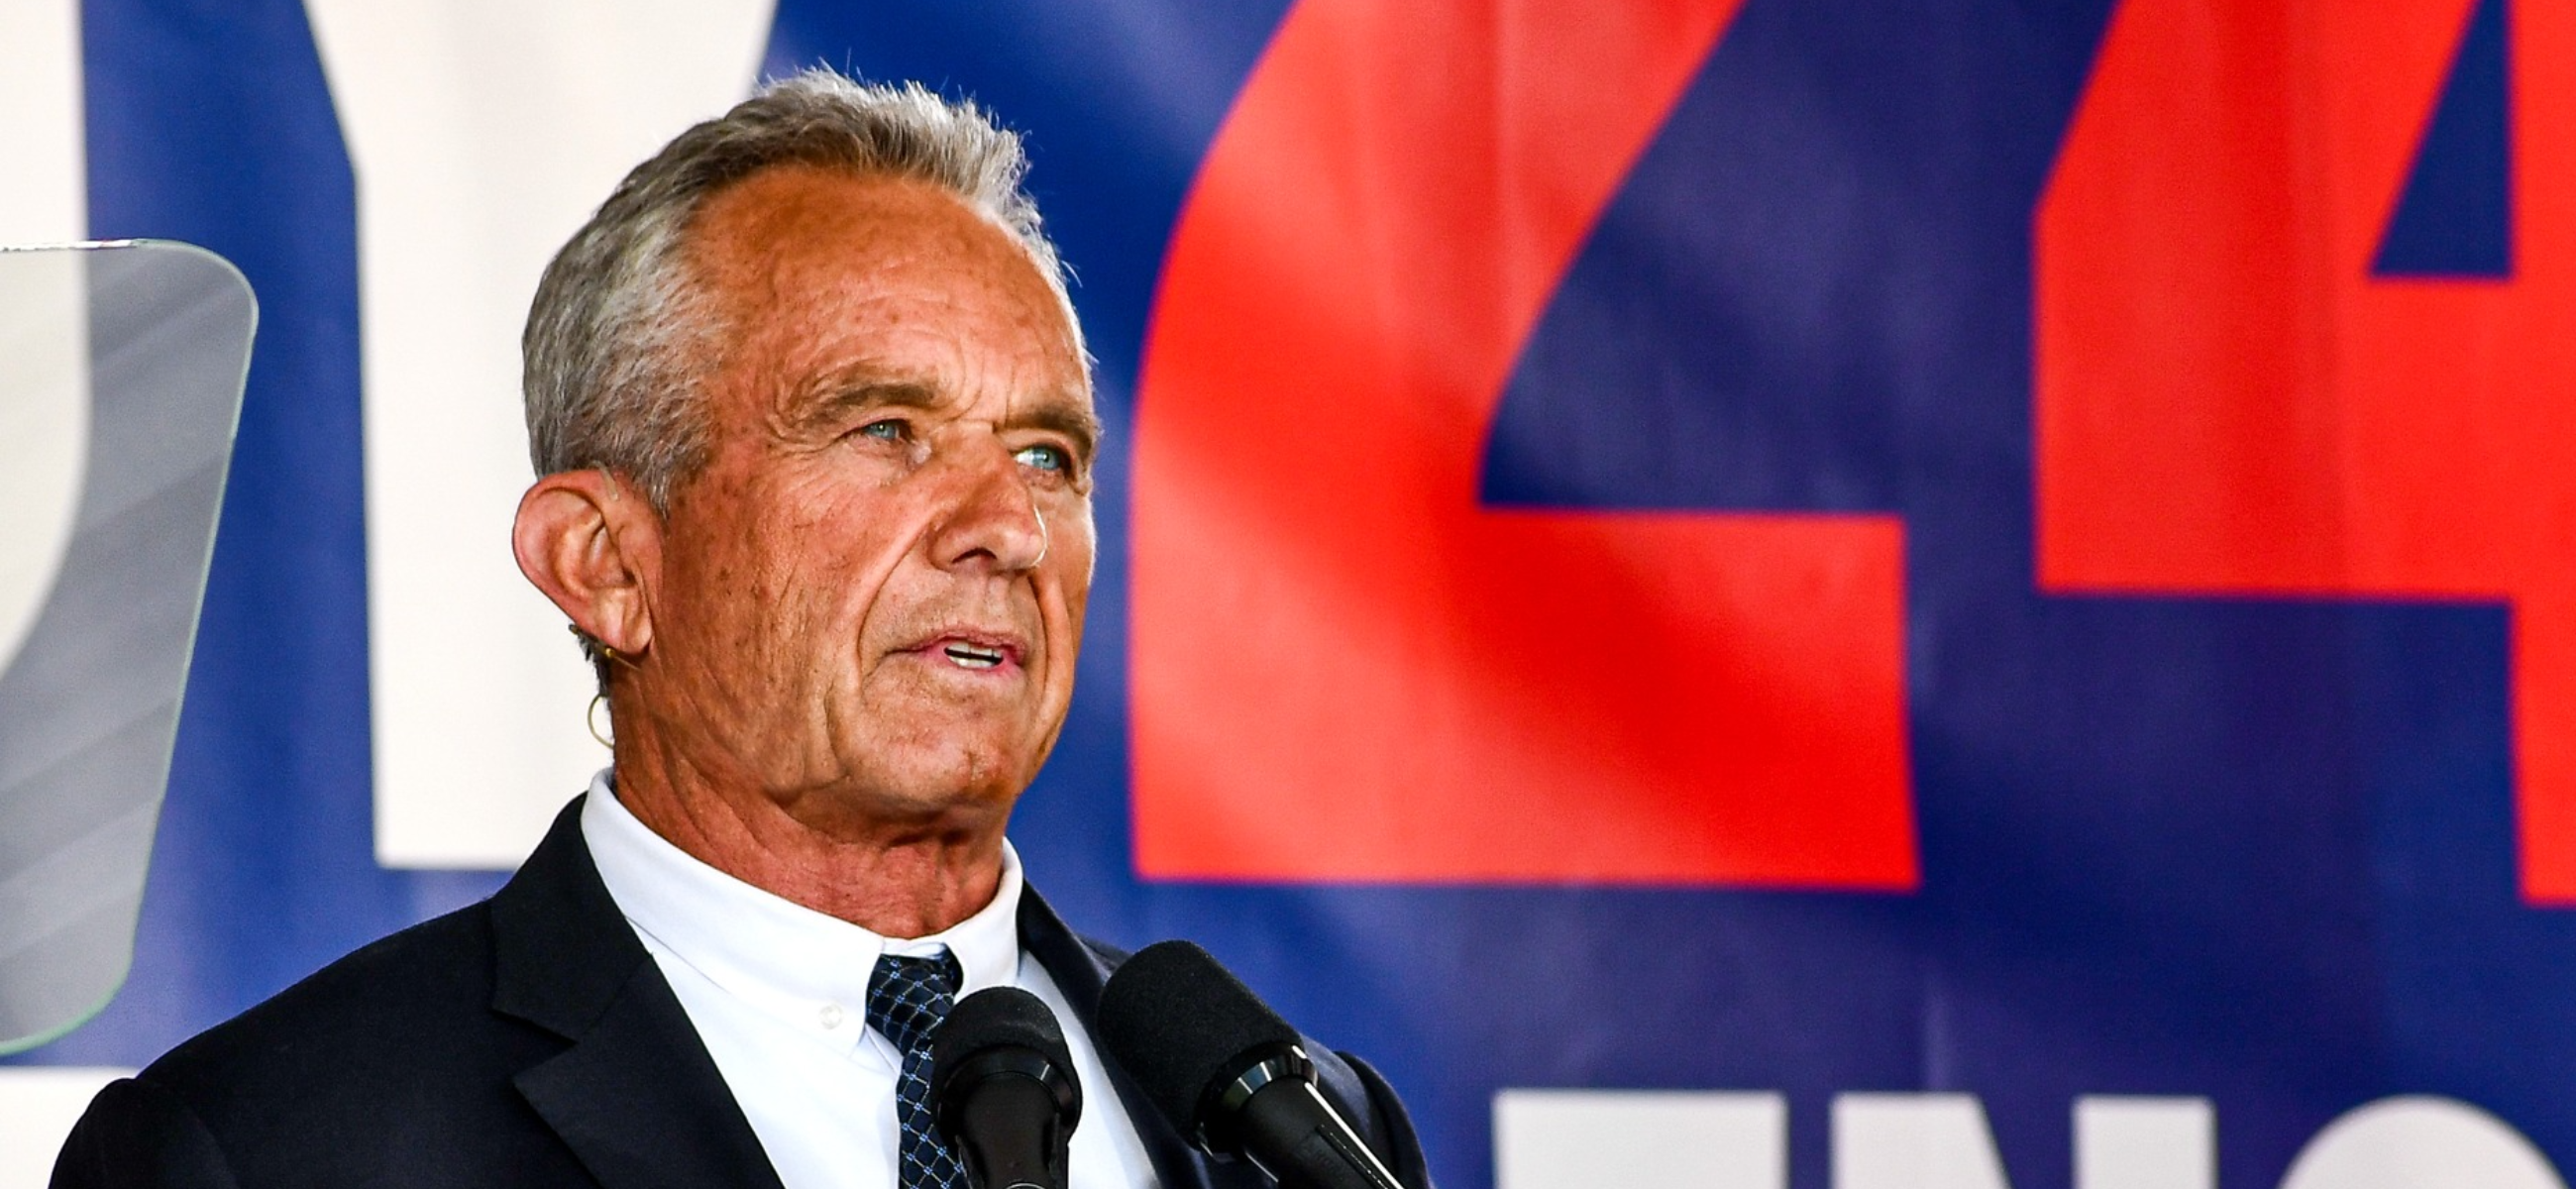 Robert Kennedy, Jr. speaks during his Independence Tour in Texas, Florida, Georgia, North Carolina, Tennessee, Kentucky + Ohio.